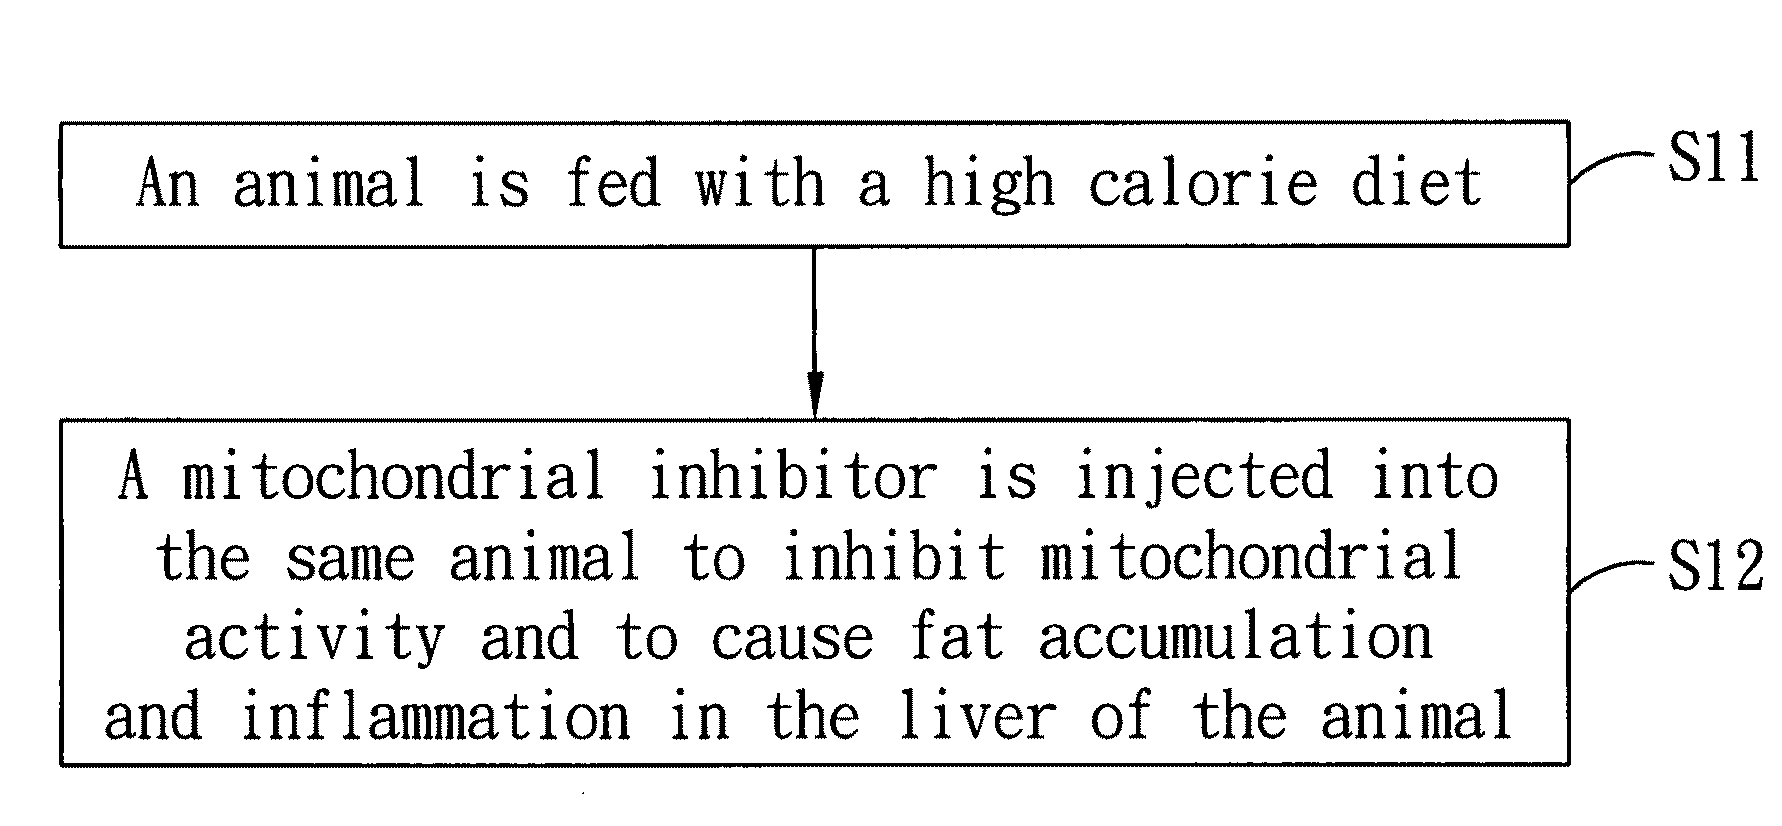 Method to induce fatty liver in animal